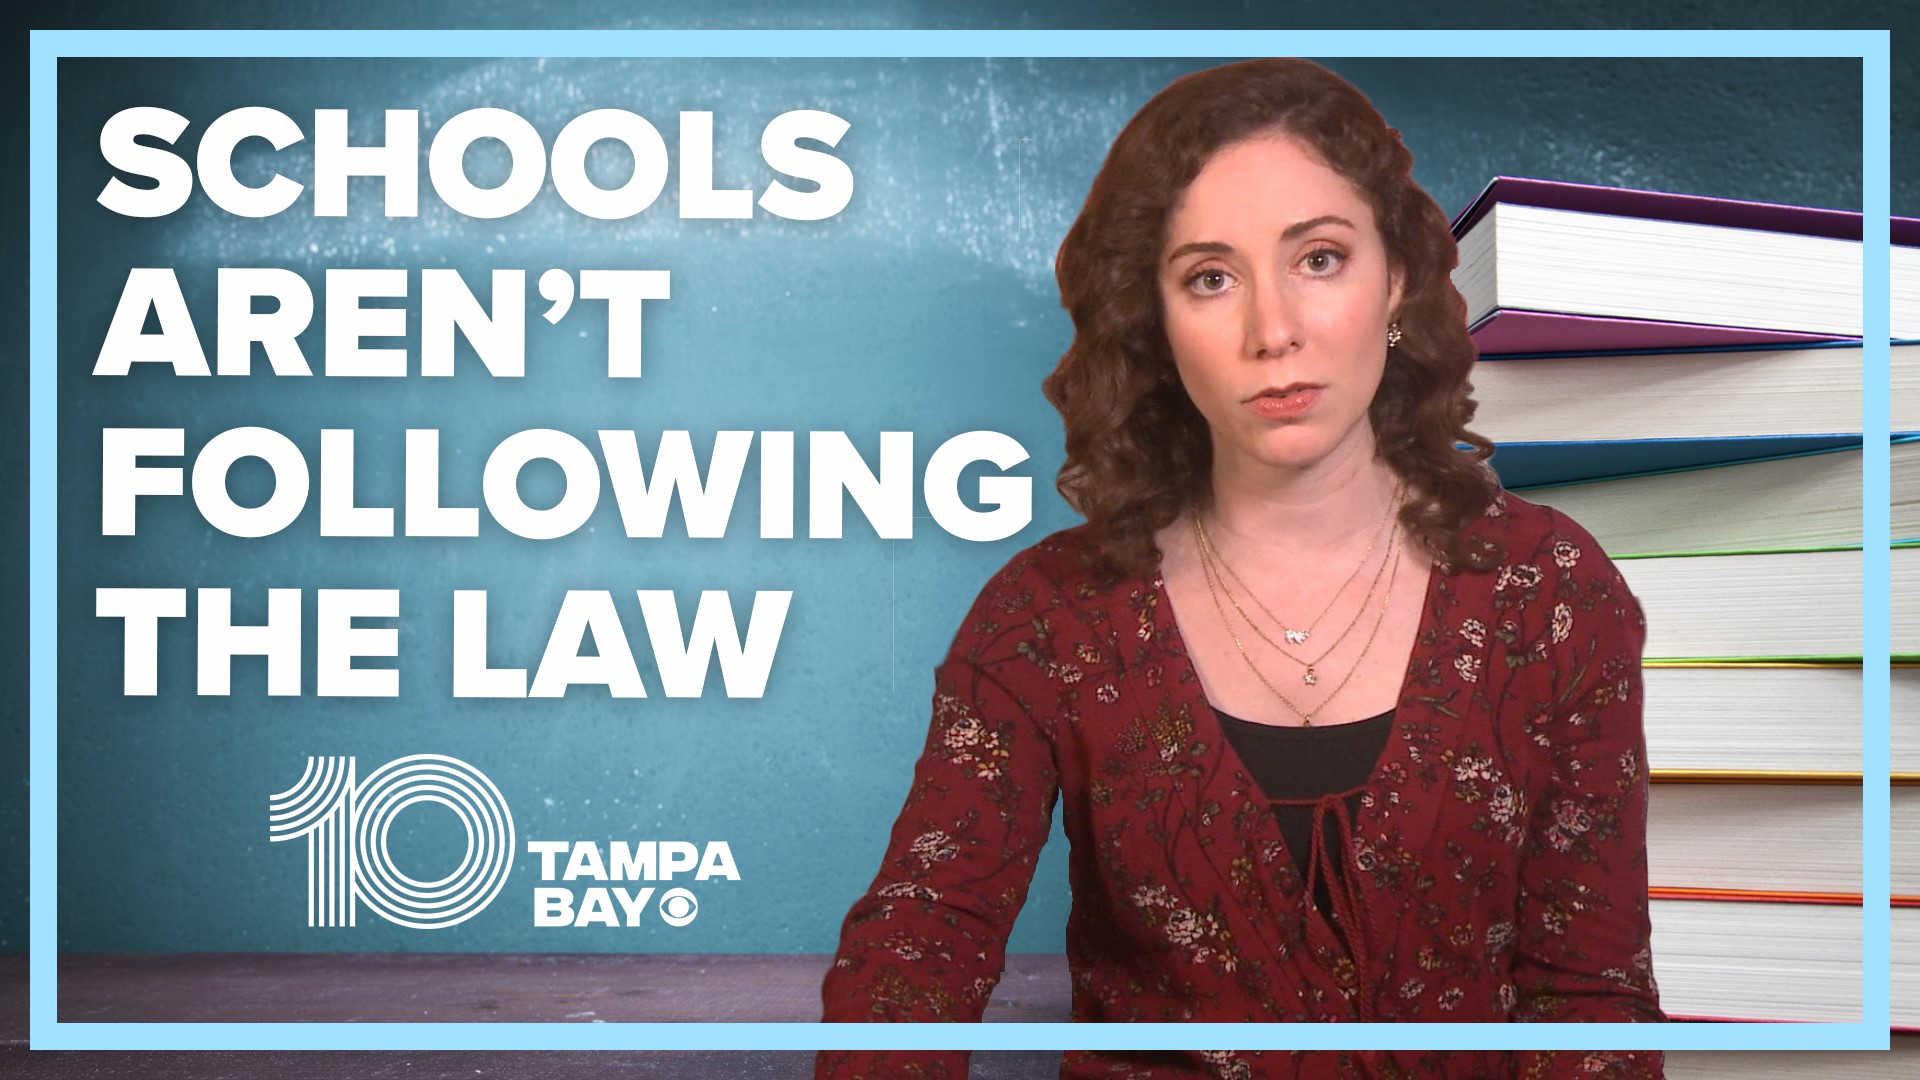 Fewer than half of Tampa Bay-area school employees have gotten the legally-required training that was mandated after the Parkland shooting.